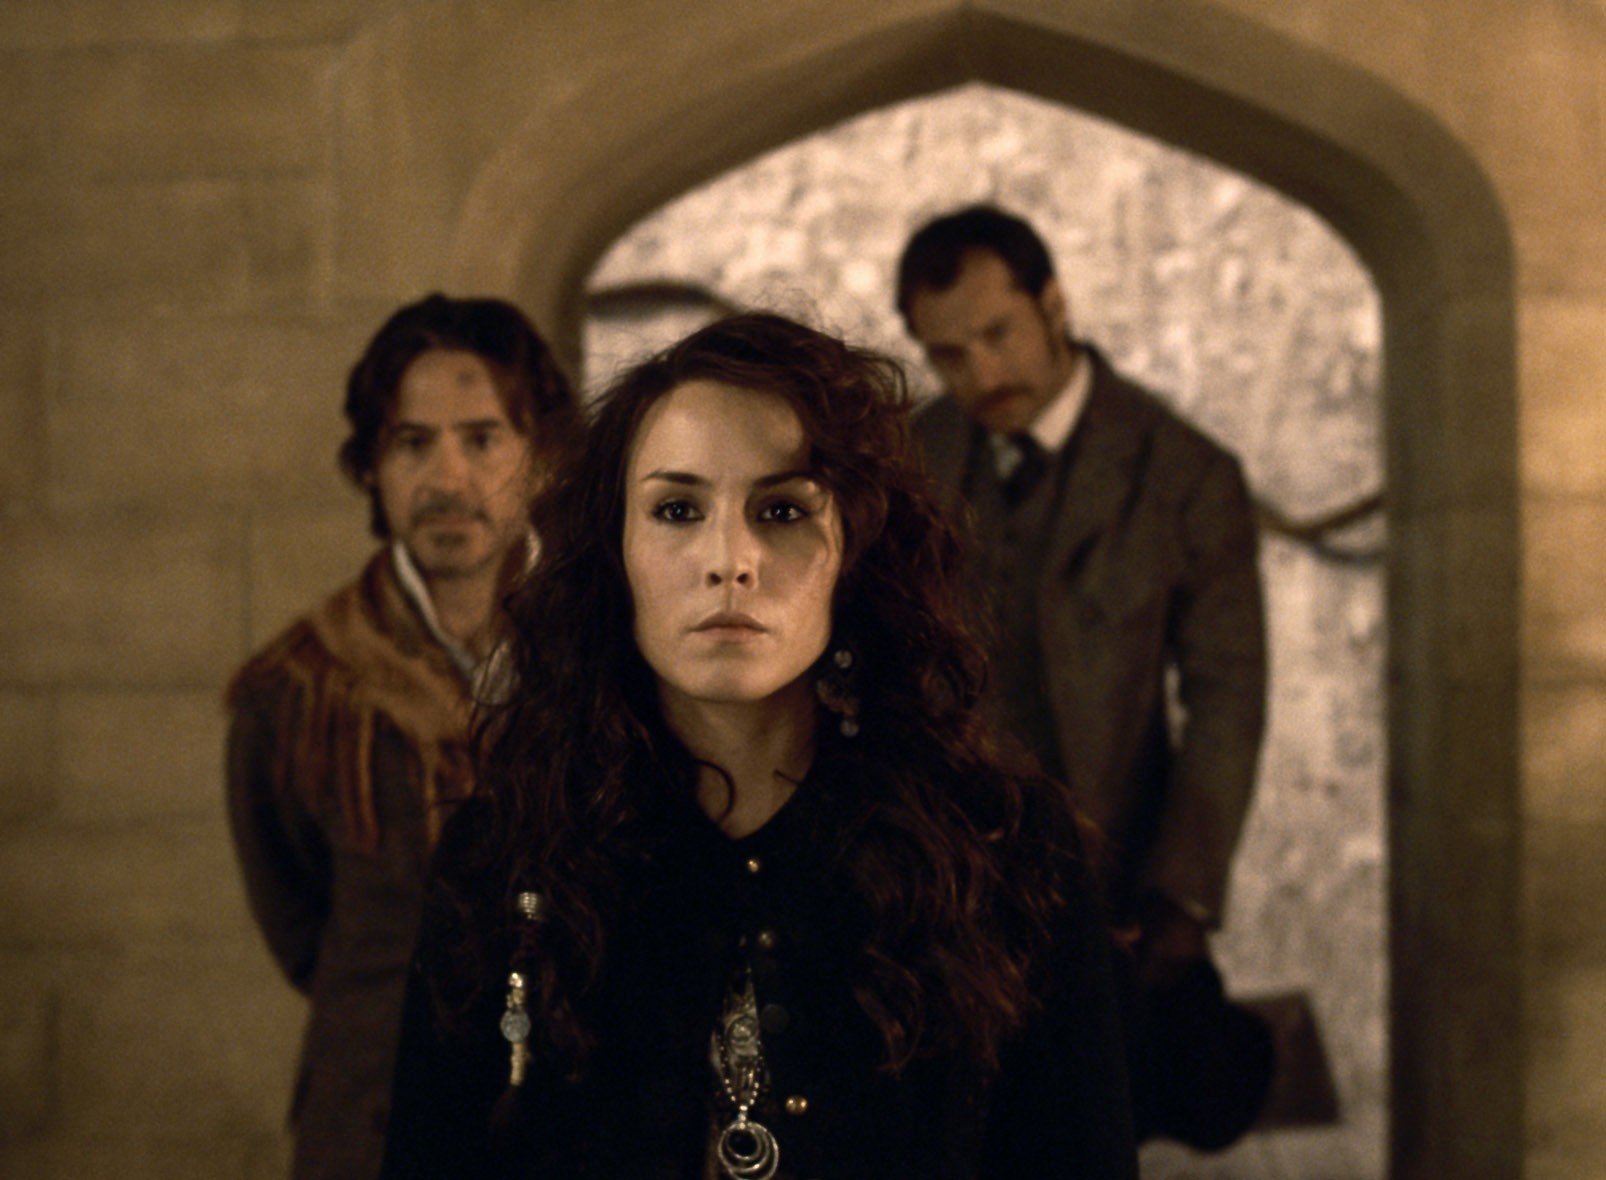 Robert Downey Jr., Noomi Rapace and Jude Law in Warner Bros. Pictures' Sherlock Holmes: A Game of Shadows (2011)